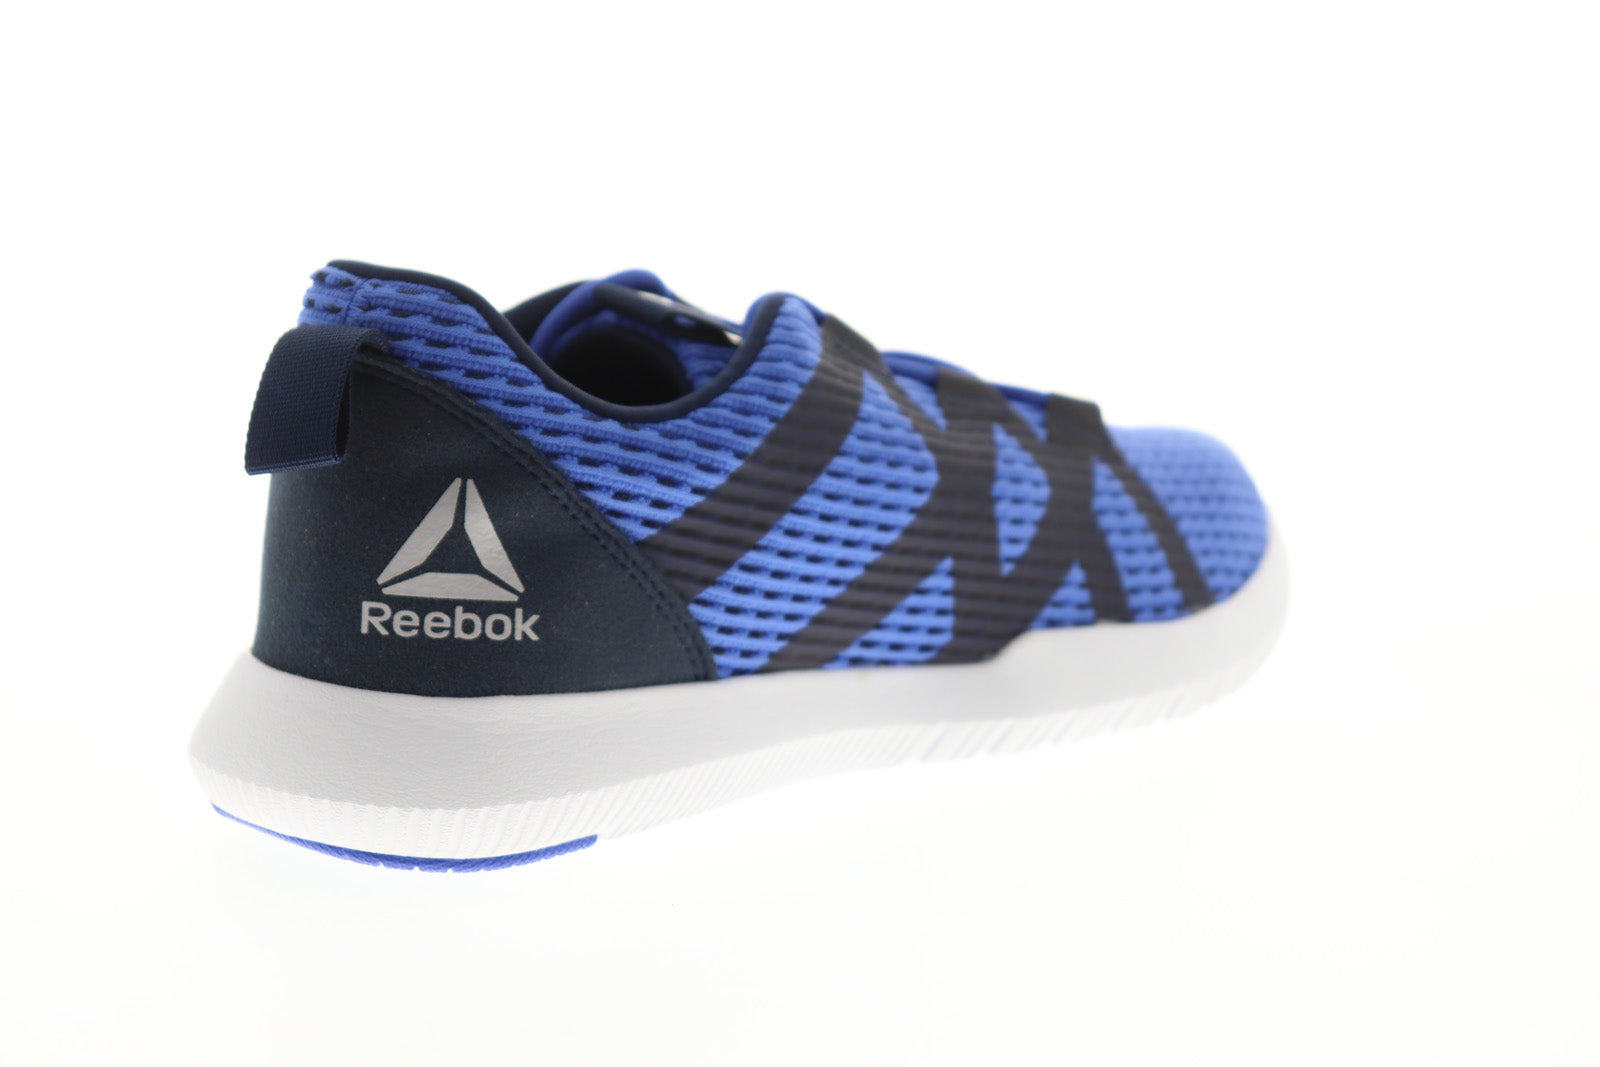 Reago Pulse DV4444 Mens Blue Canvas Lace Athletic Running - Ruze Shoes